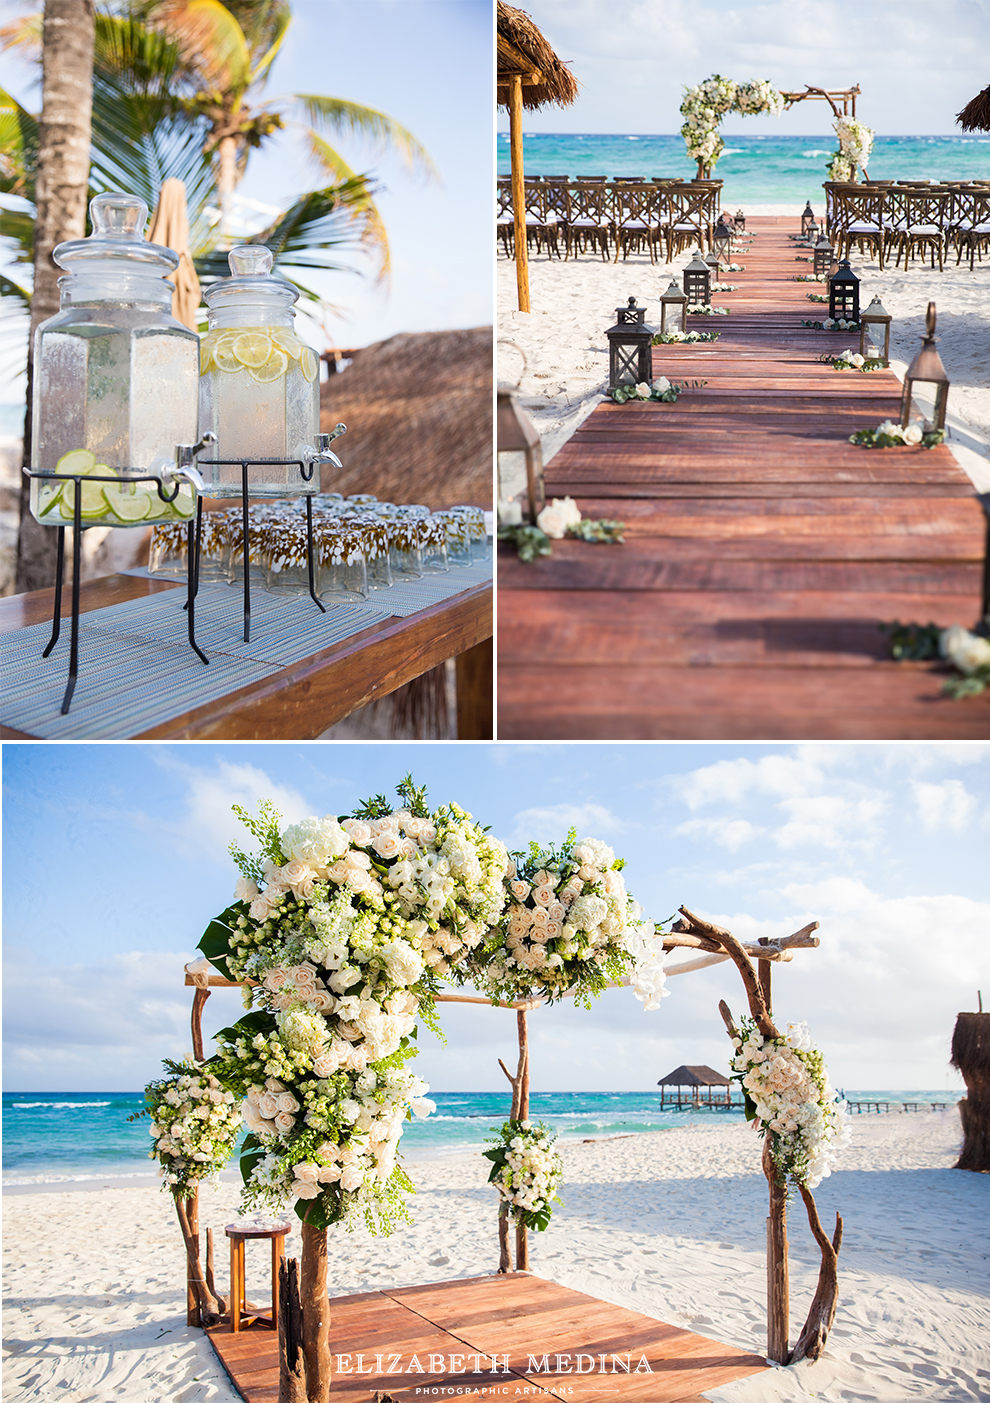  playa del del carmen photographer viceroy riviera maya wedding 0011 Playa del Carmen Photographer,  Kira and Trey’s Viceroy Rivera Maya Wedding The ceremony decor for Kira and Trey´s beach wedding at Playa del Carmen's The Vicreoy Riviera Maya resort was completely on point!
 